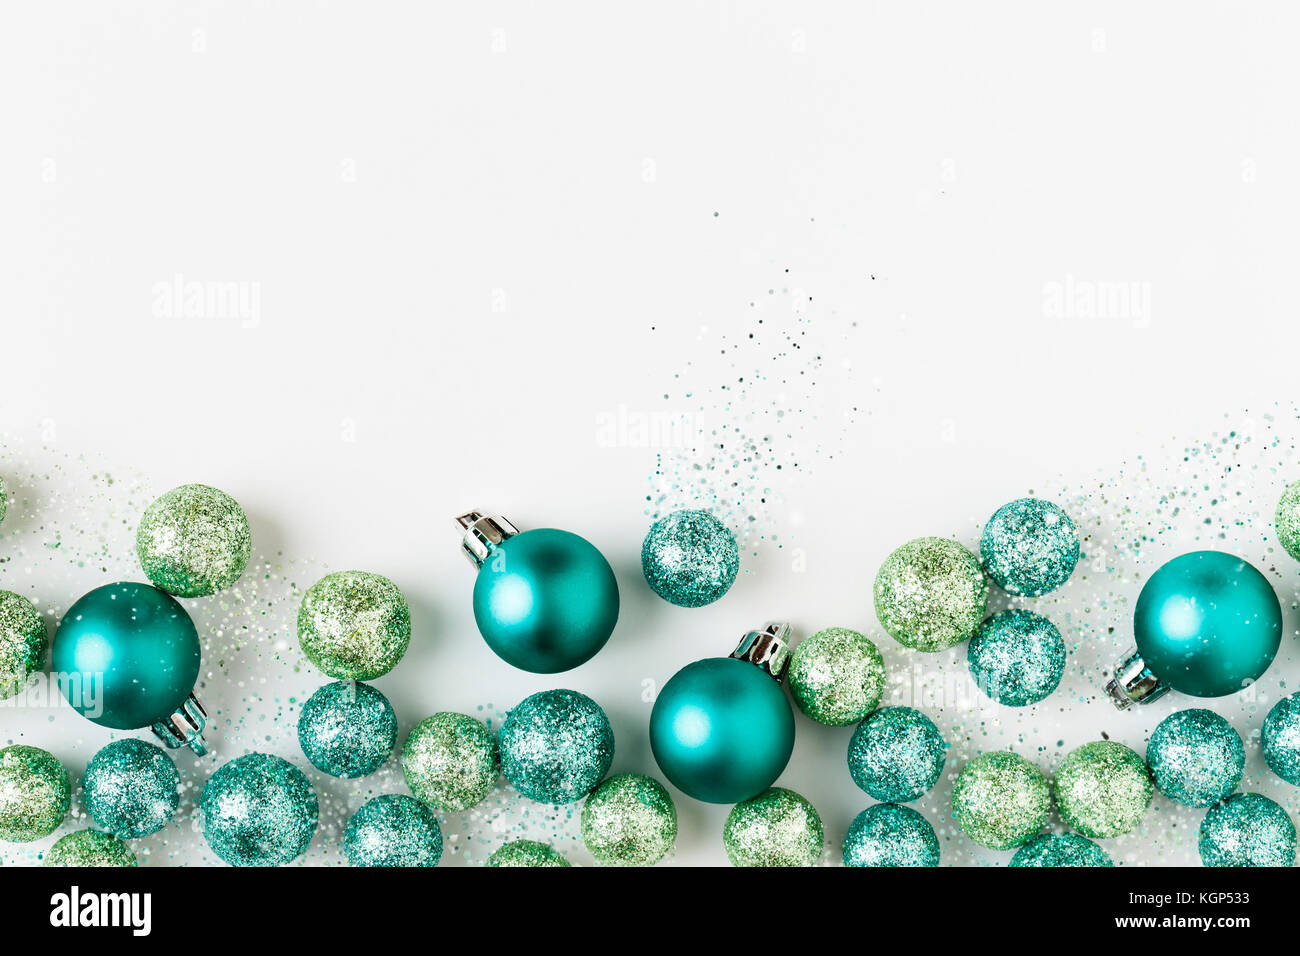 Beautiful, bright, modern, blue and green Christmas holiday ornaments decorations with sparkling glitter on white background. Horizontal border. Stock Photo